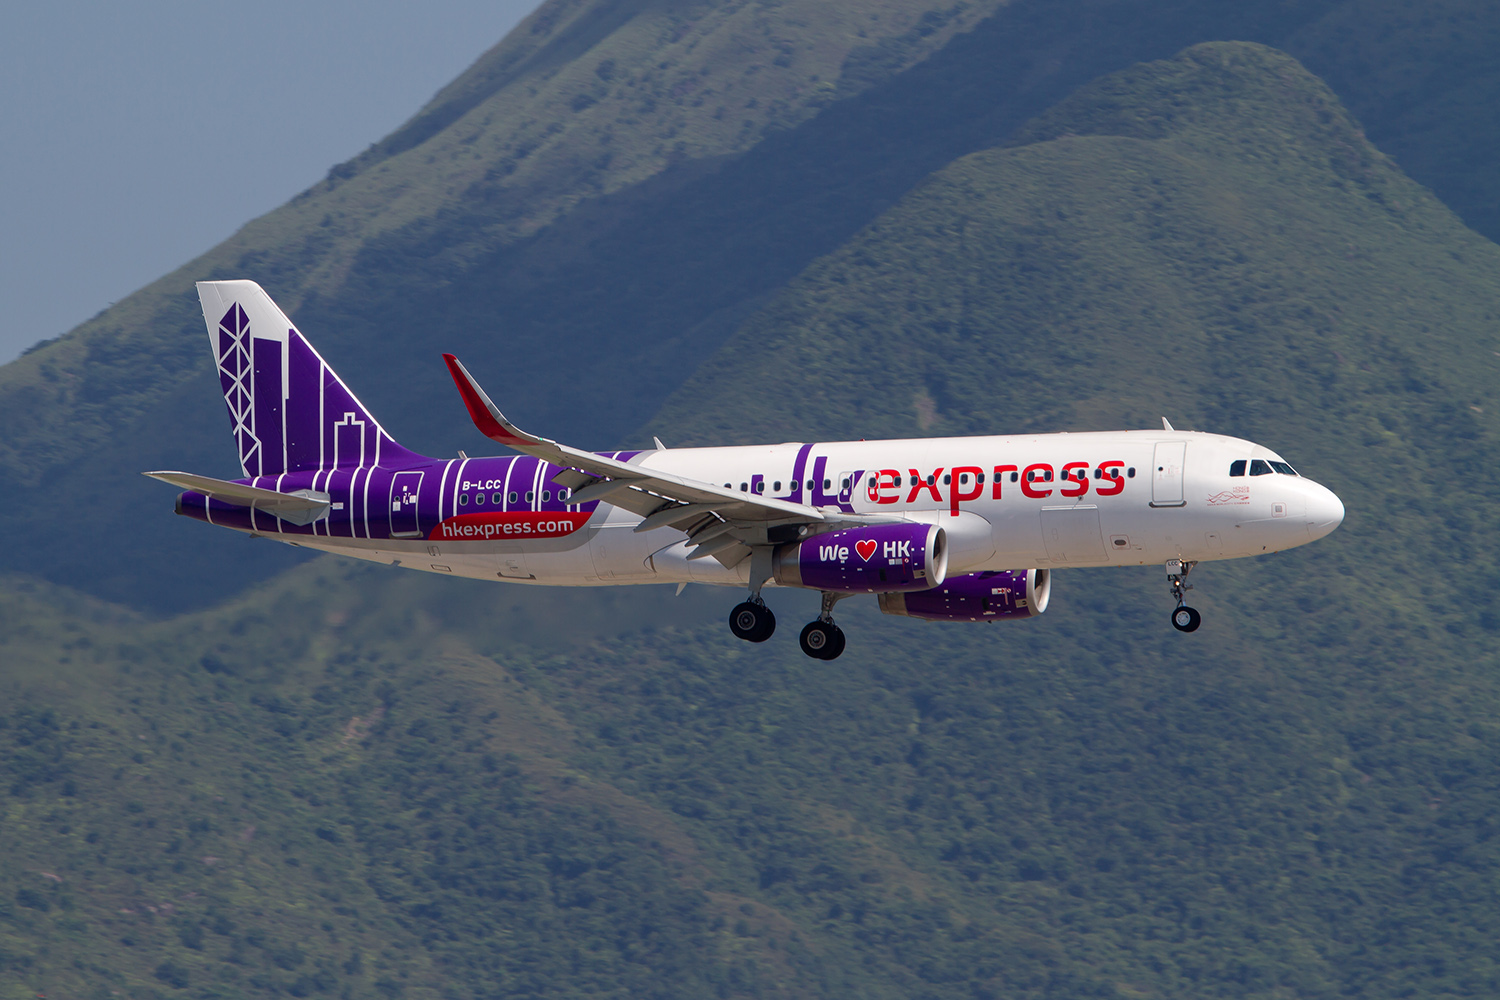 HK Express expands in Vietnam with direct flights to Hanoi